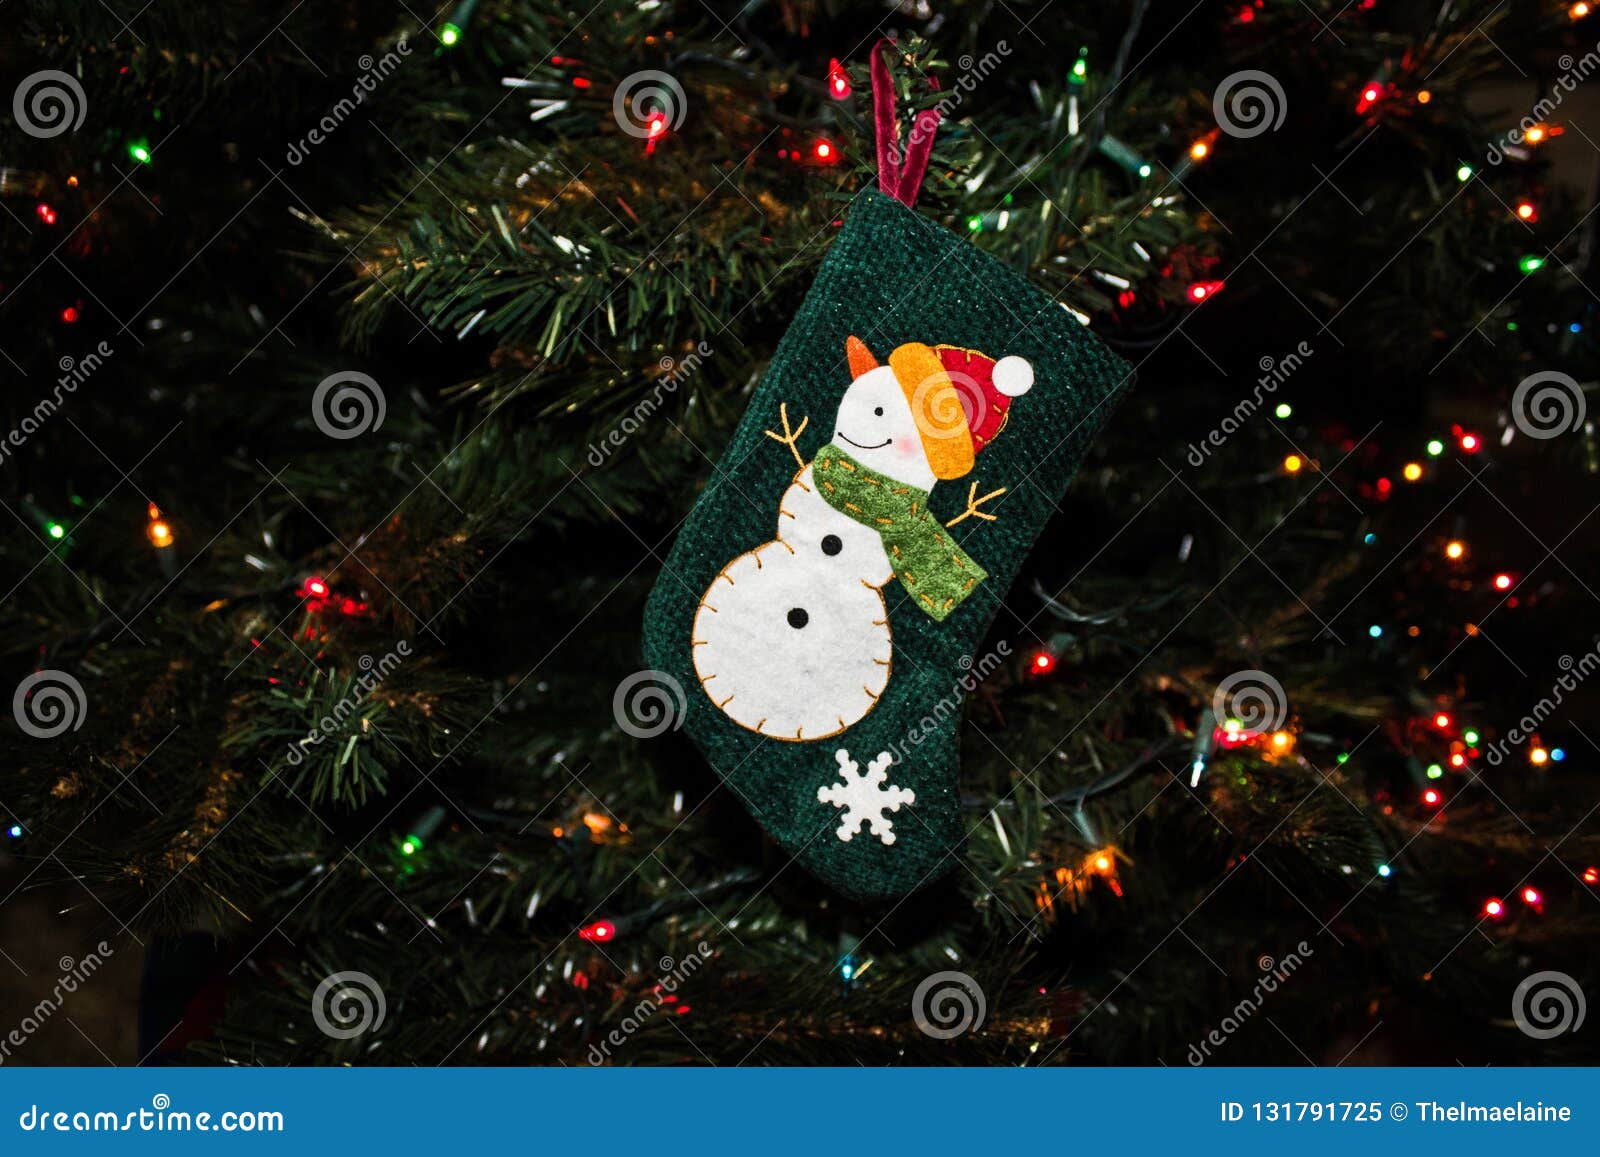 Christmas Ornament of a Snowman on a Stocking on an Evergreen Tree ...